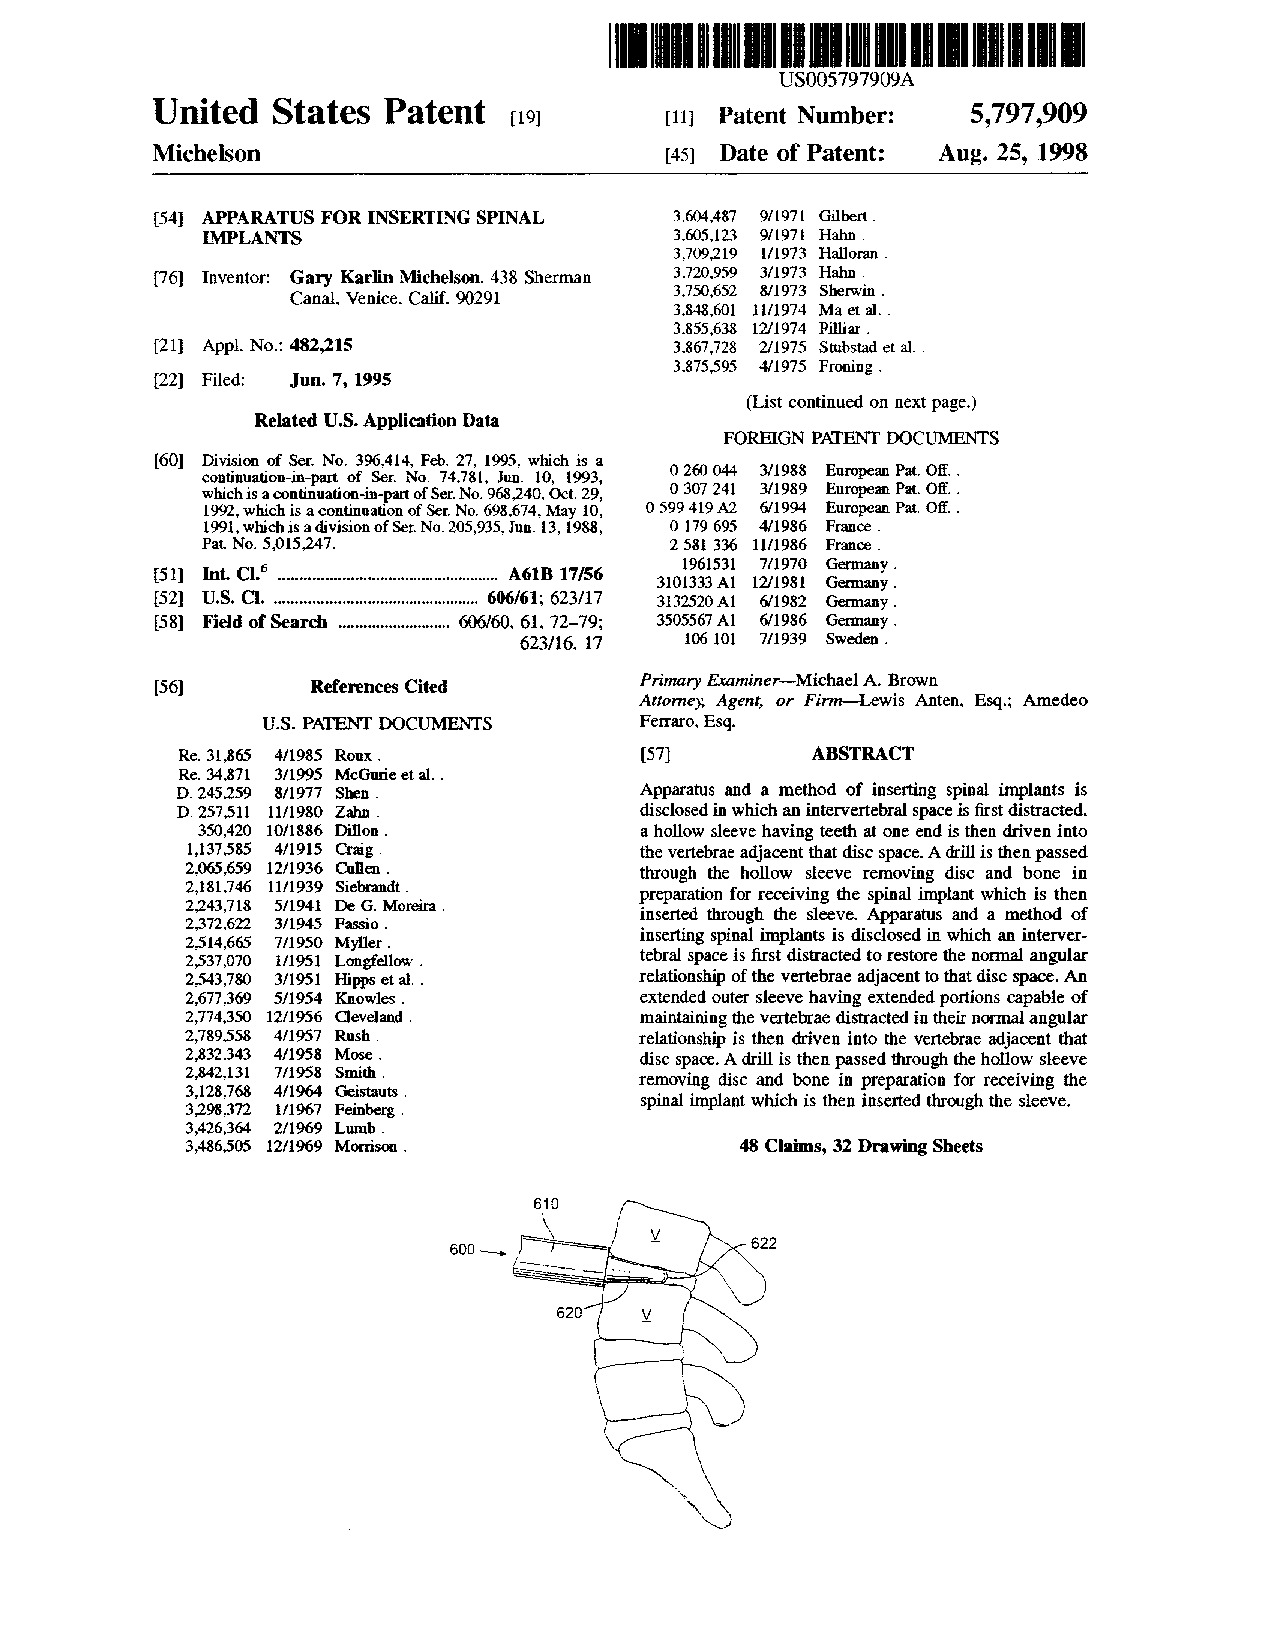 Apparatus for inserting spinal implants - Patent 5,797,909